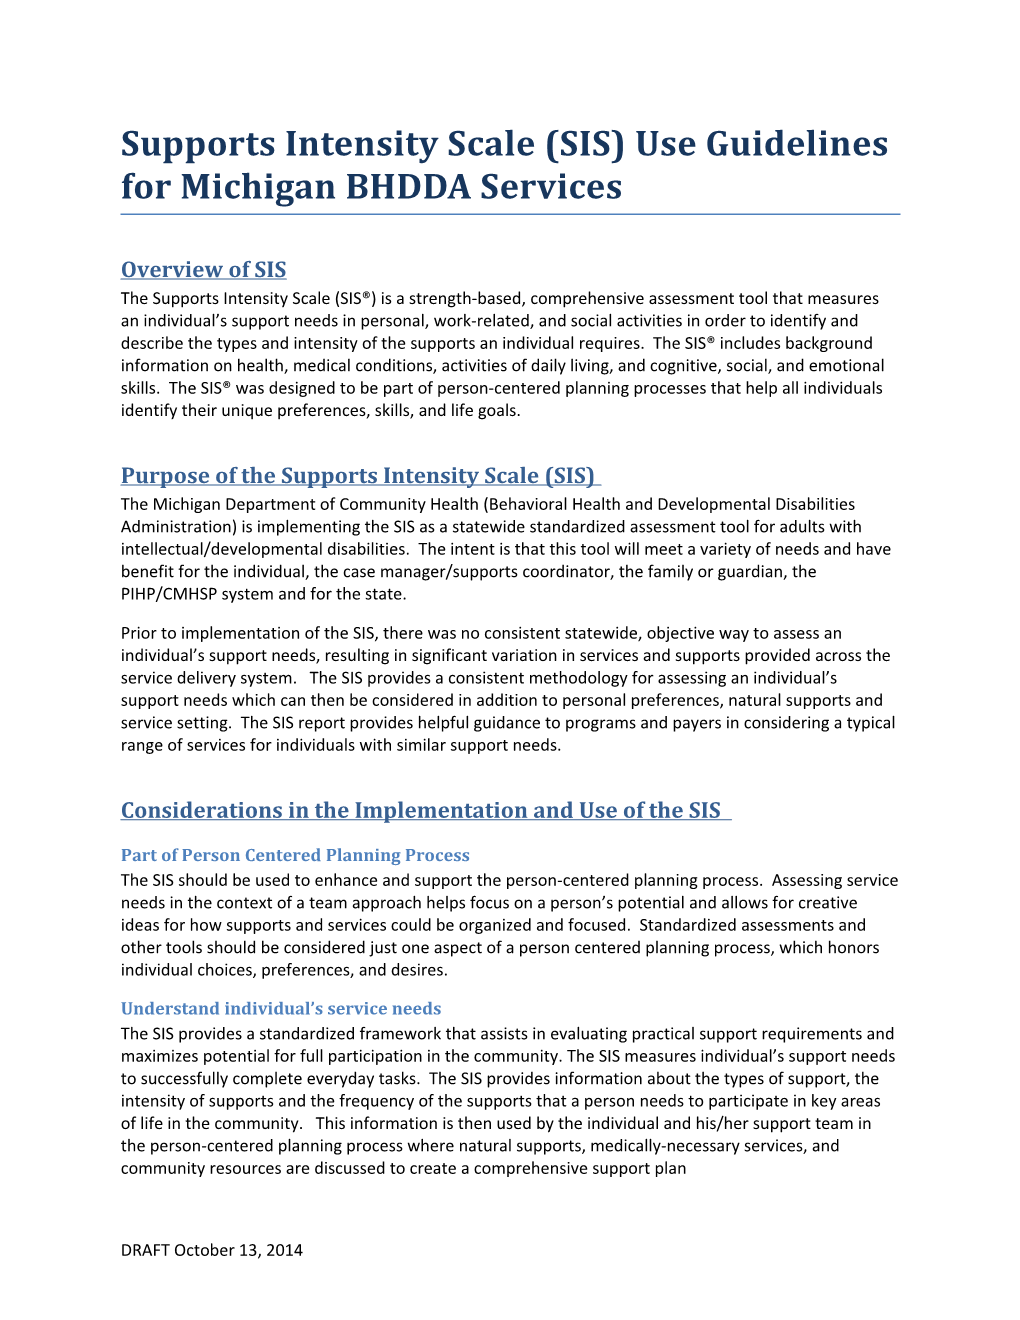 Supports Intensity Scale (SIS) Use Guidelines for Michigan BHDDA Services